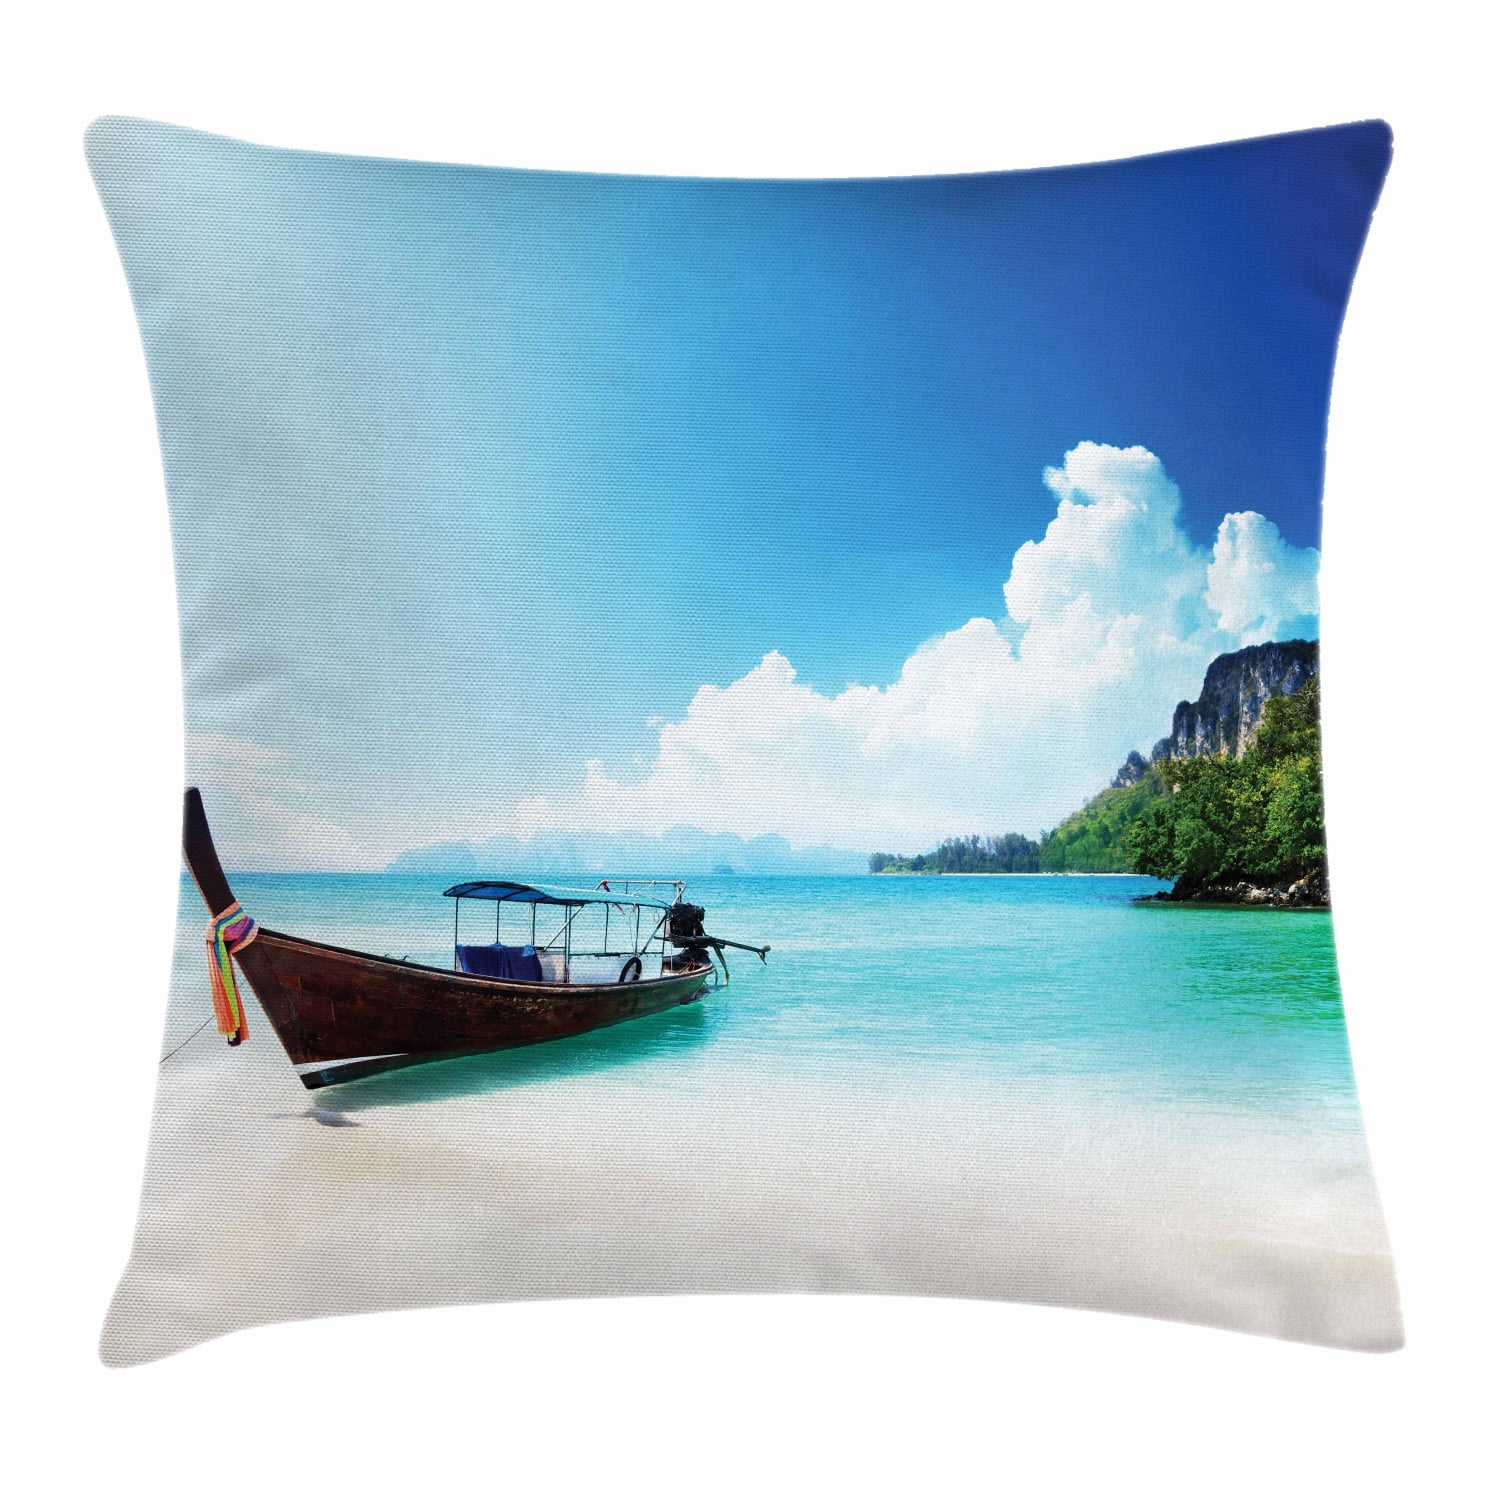 Multicolor Lake Gifts & Accessories Camping Nature Outdoor-Lake Ontario Life Throw Pillow 18x18 